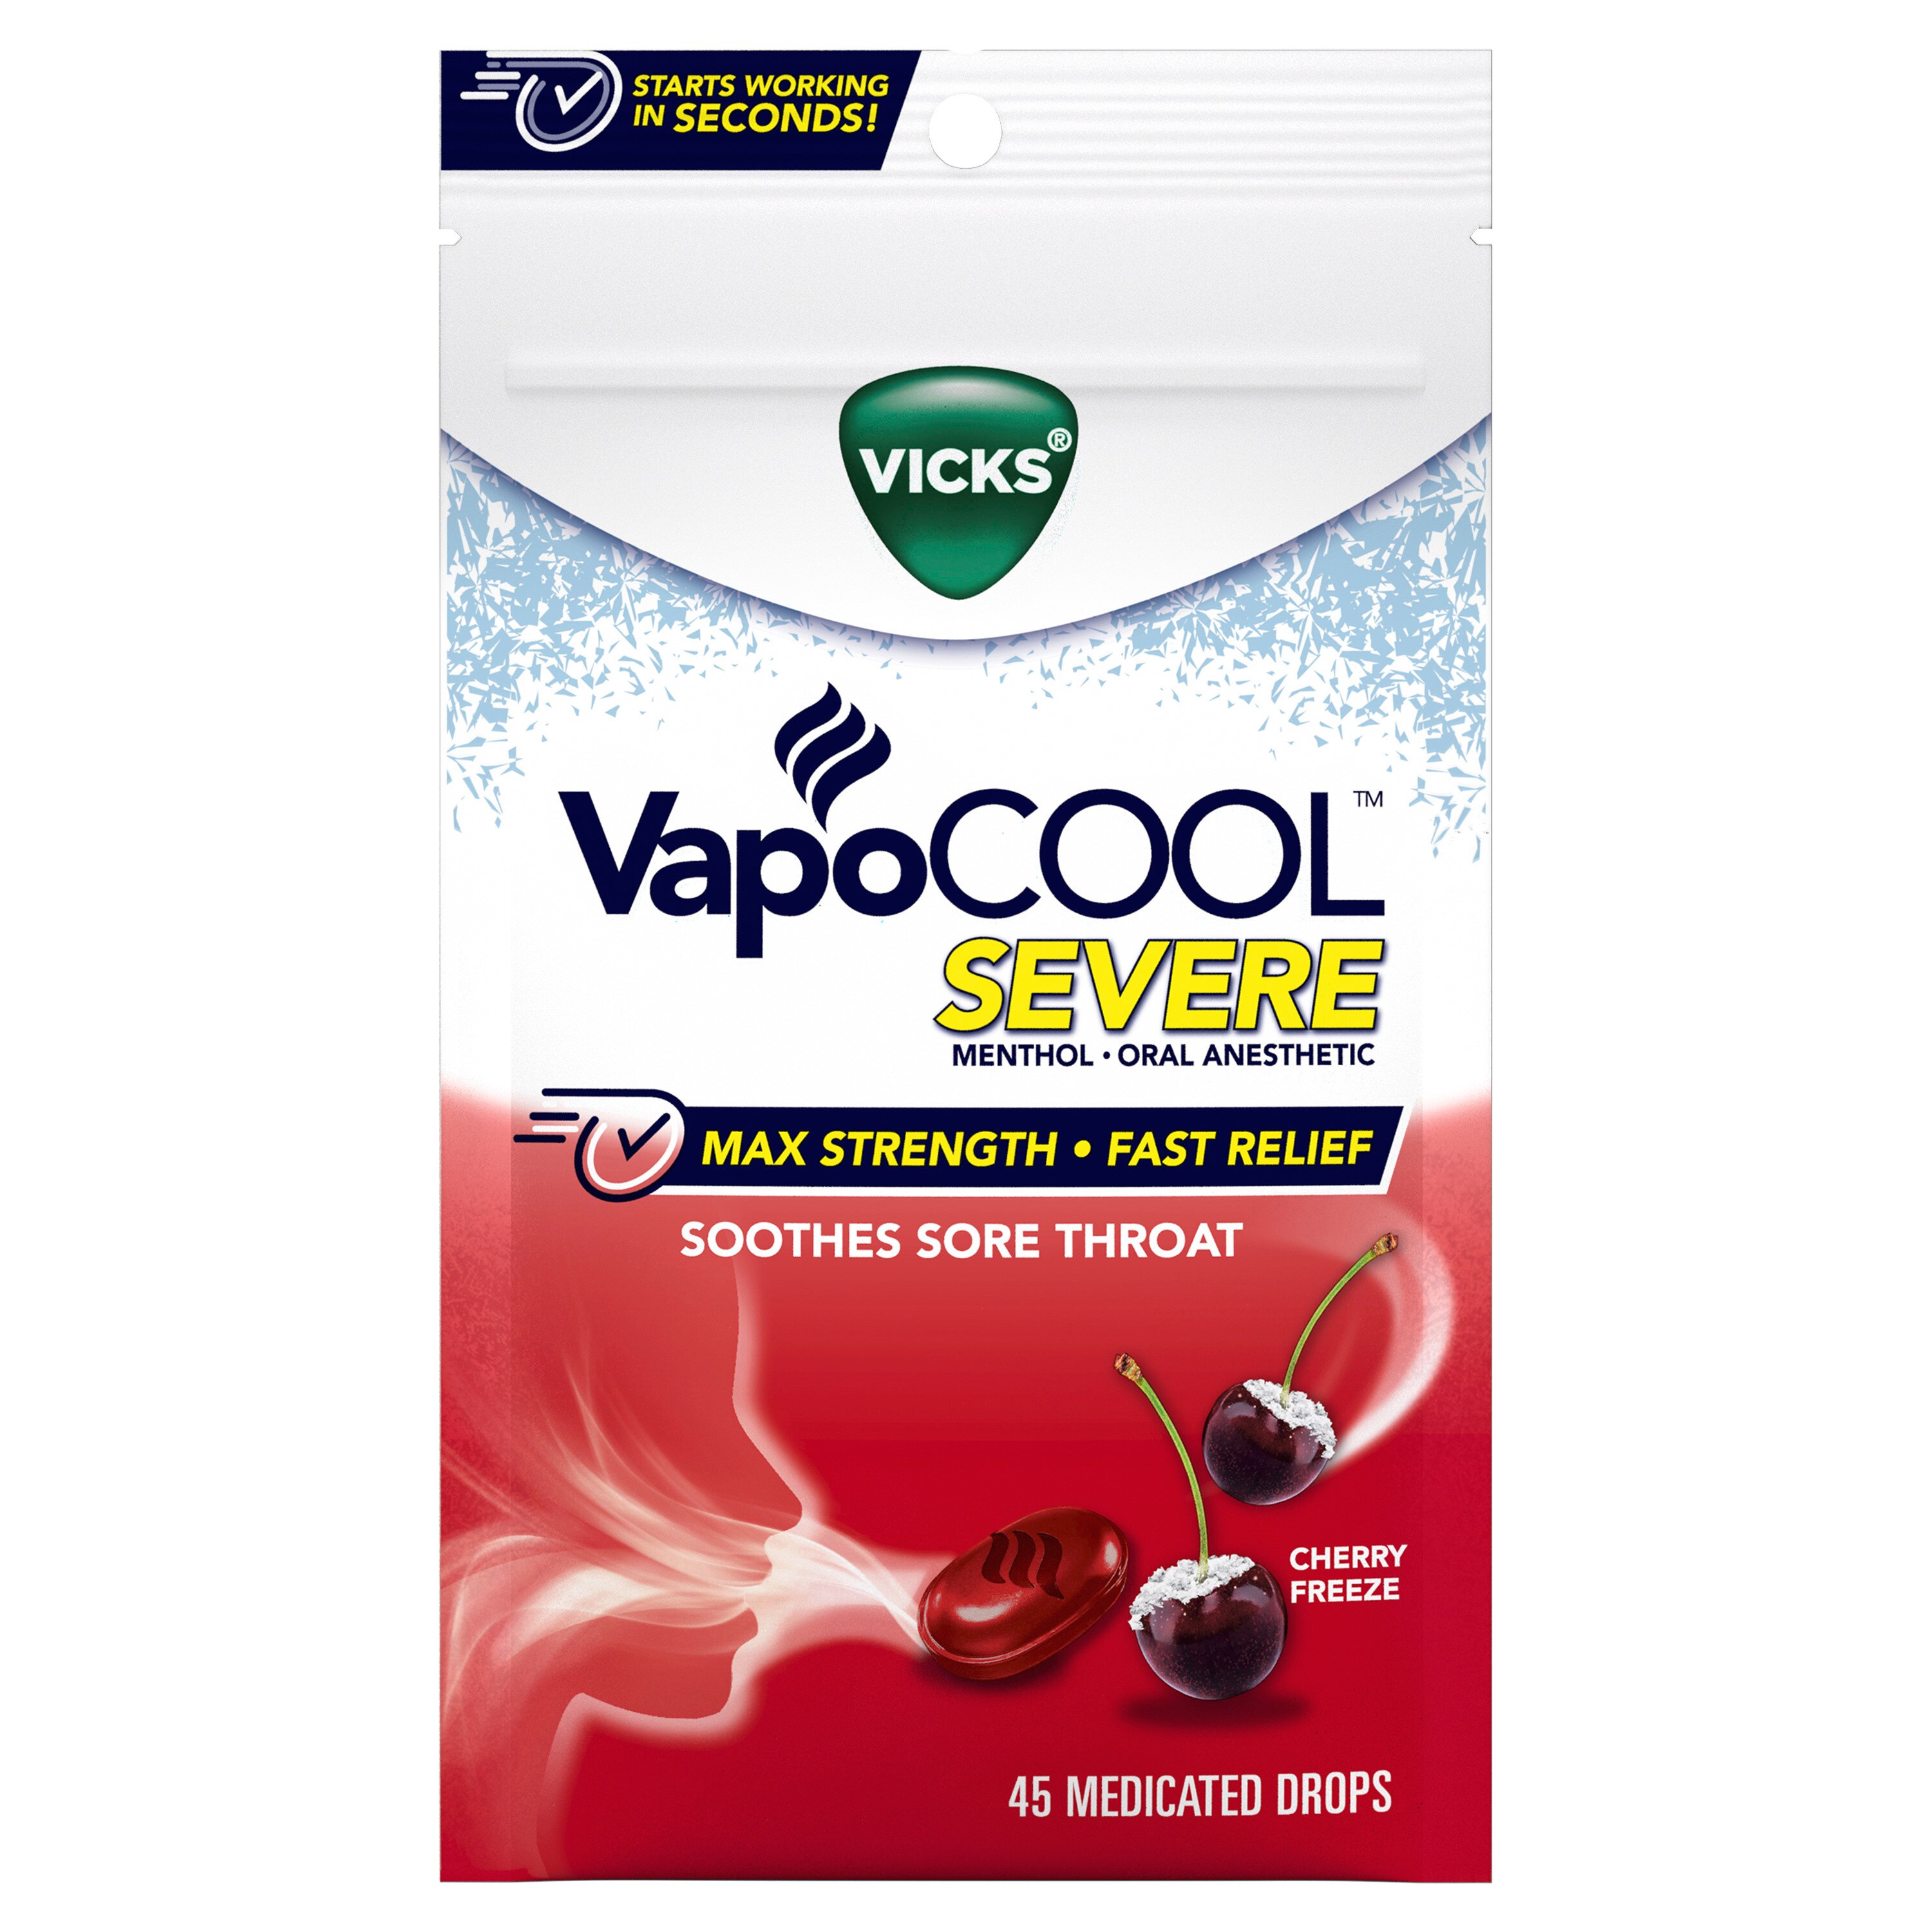 VICKS VapoCOOL Severe Medicated Drops, Soothes Sore Throat Pain Caused by Cough, Cherry Freeze Flavor, 45 CT